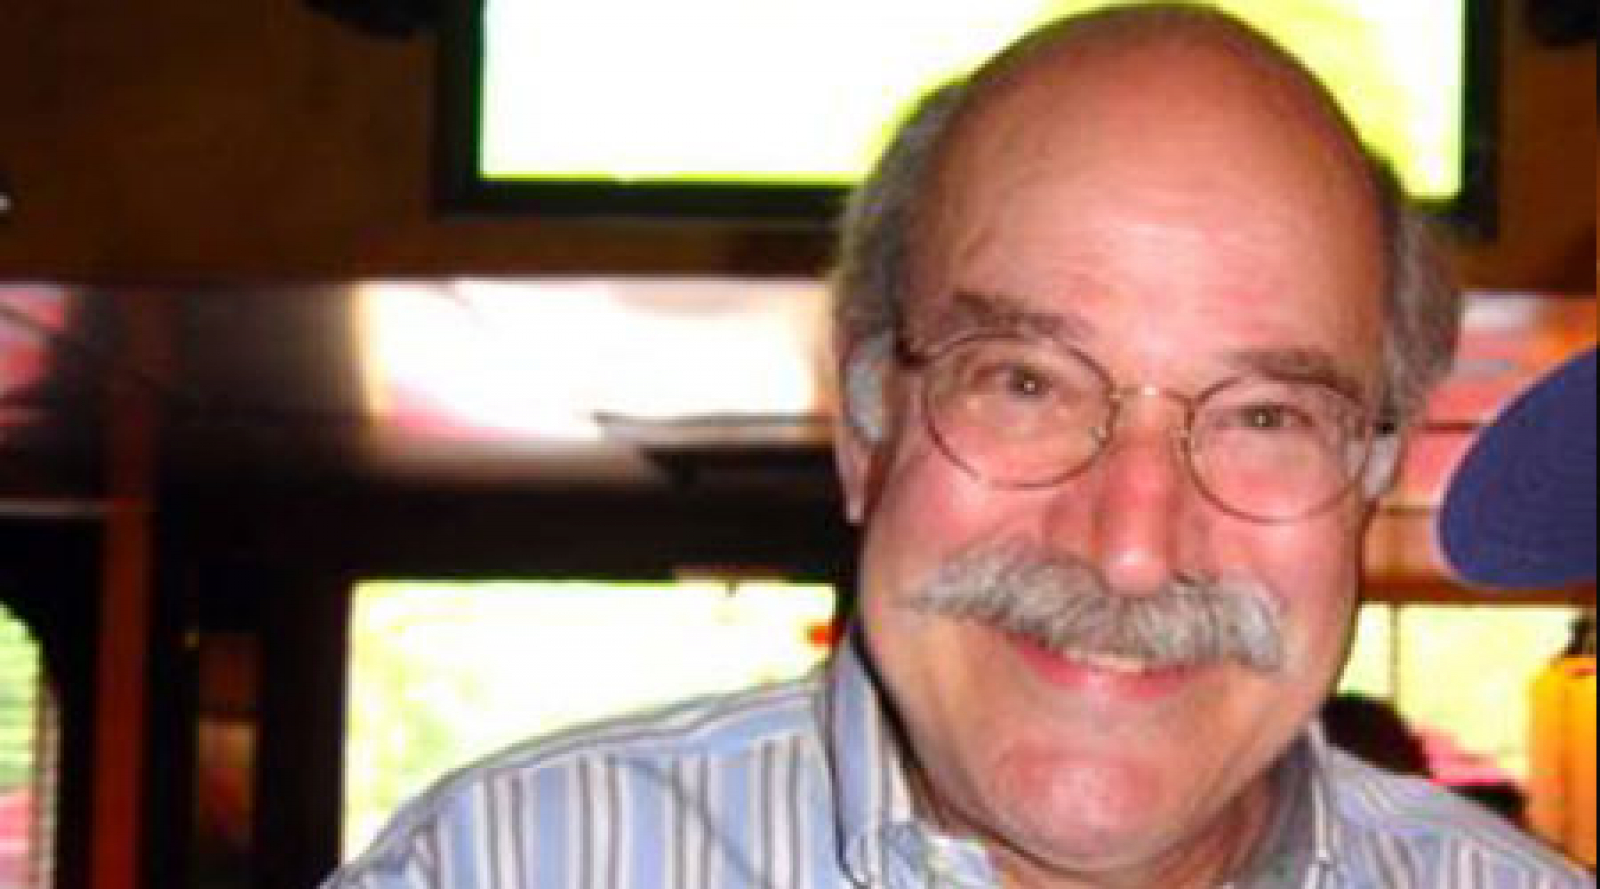 NDI mourns the passing of long-time trainer Willie Blacklow